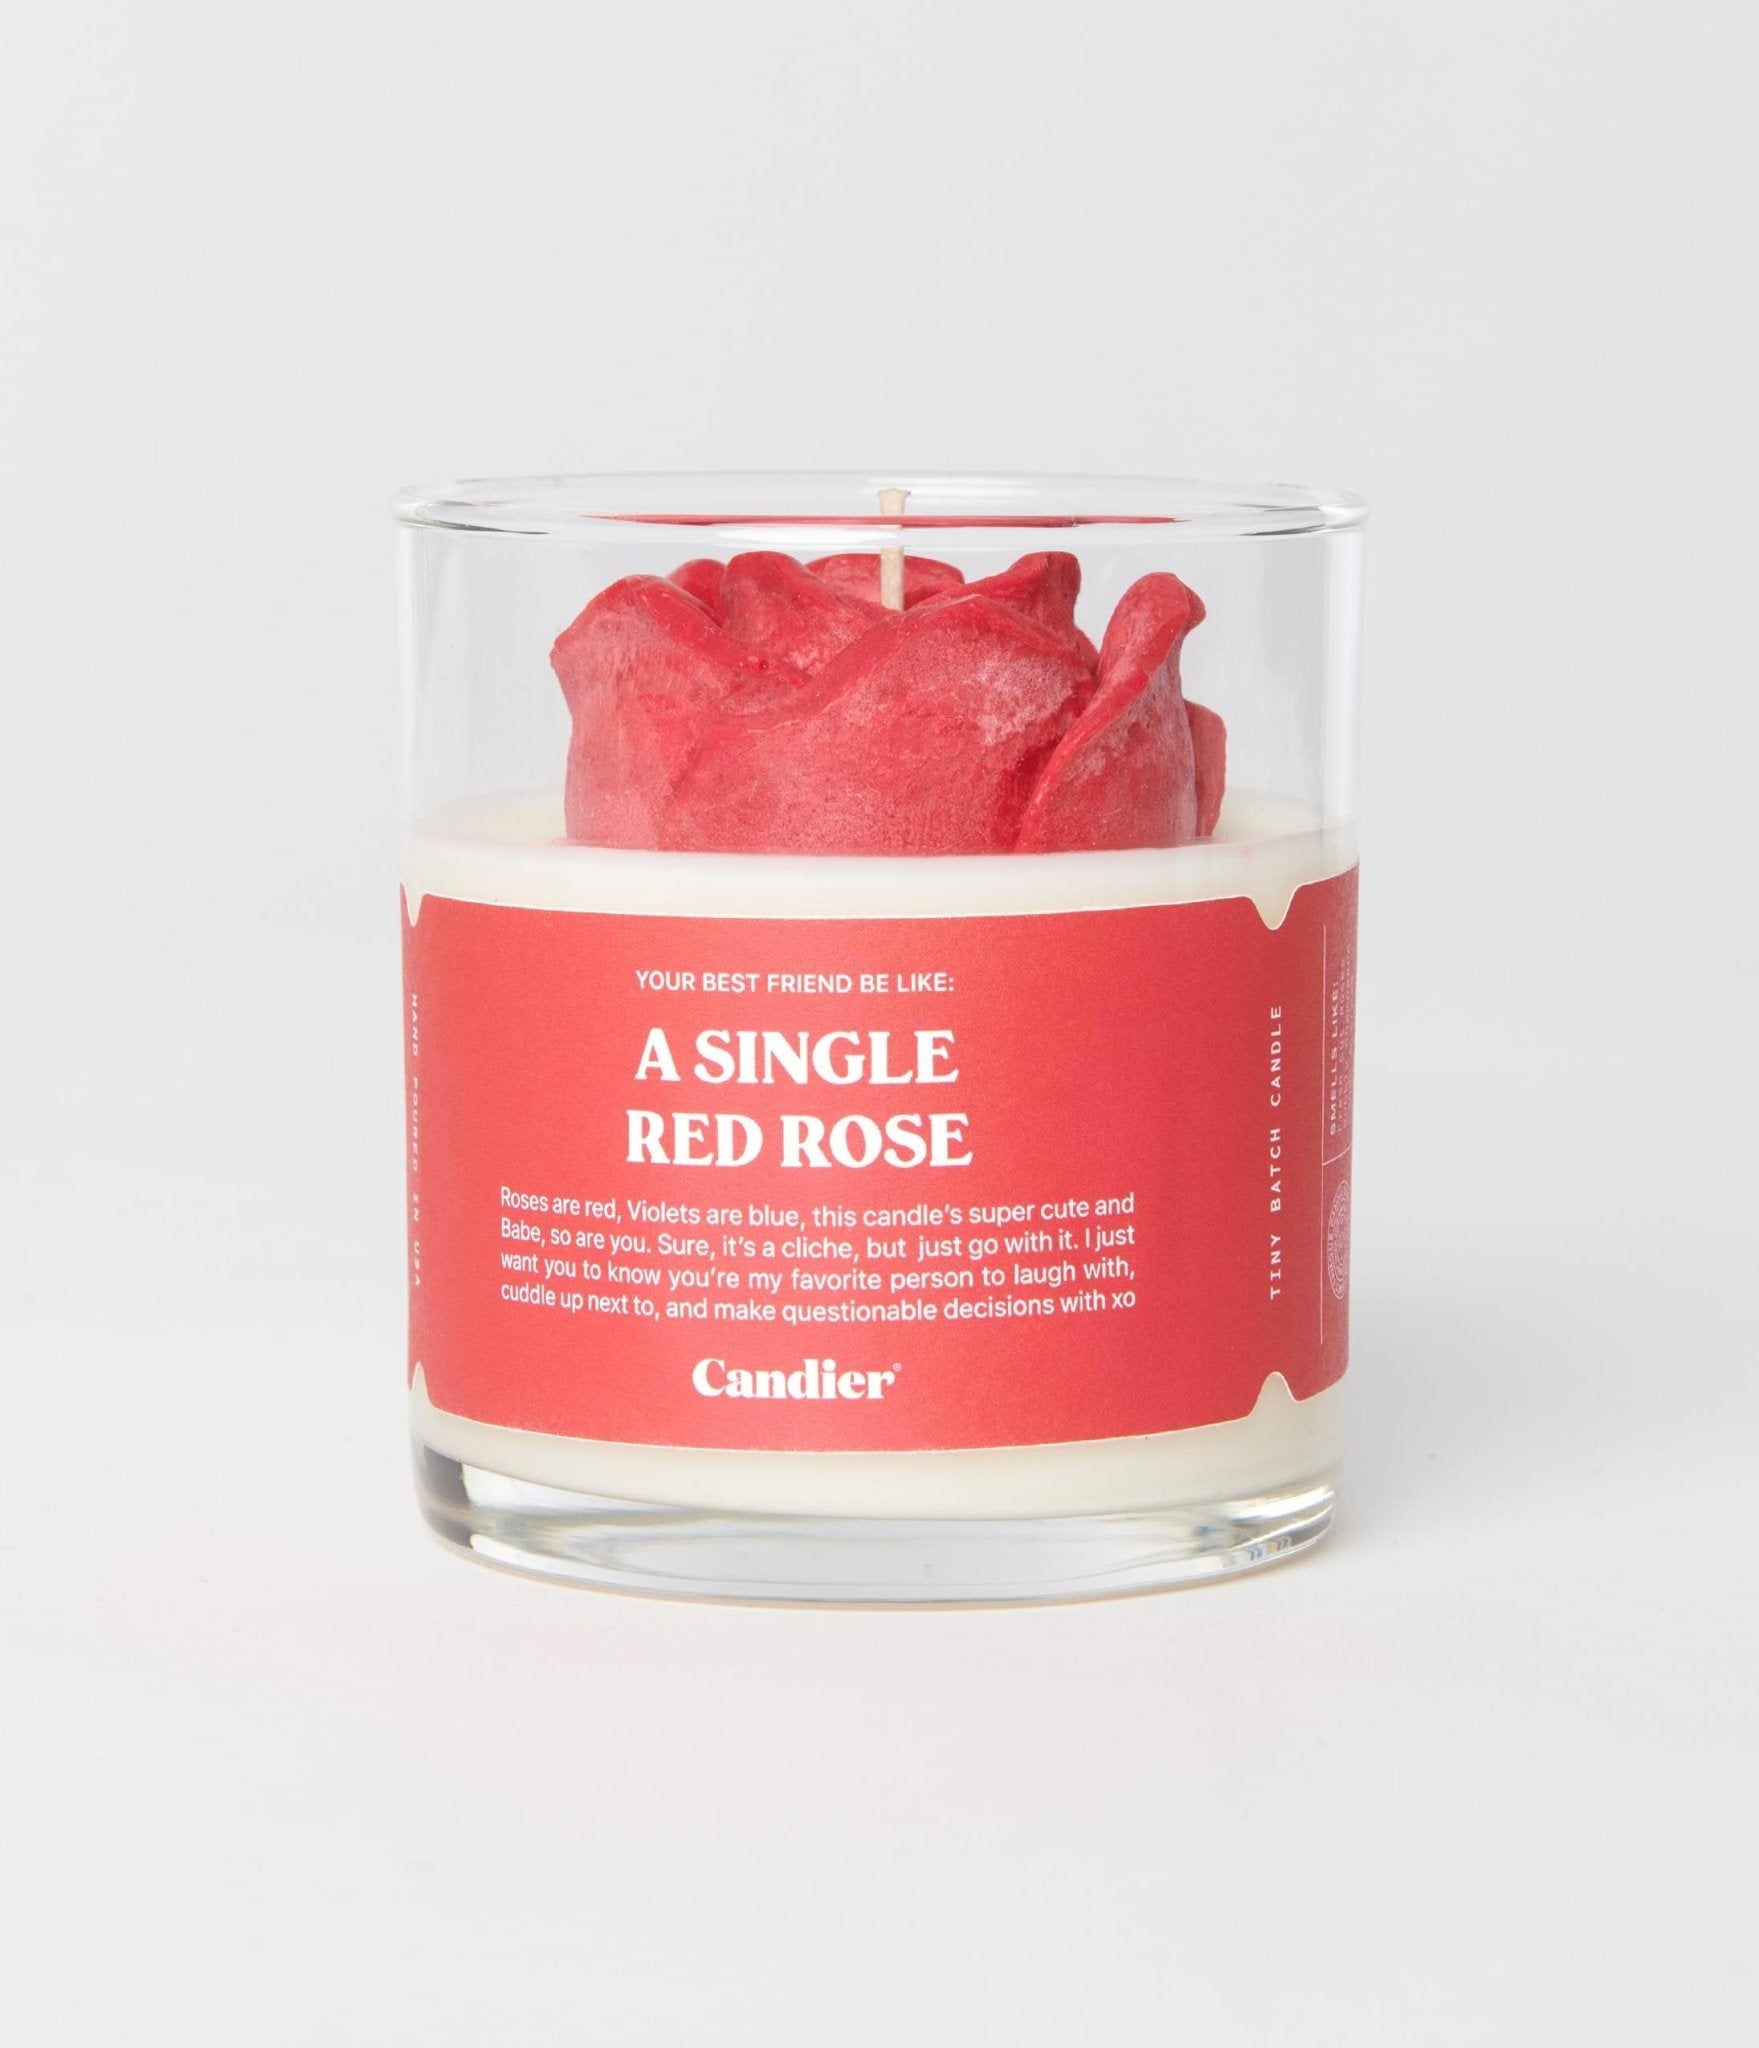 

A Single Red Rose Candle